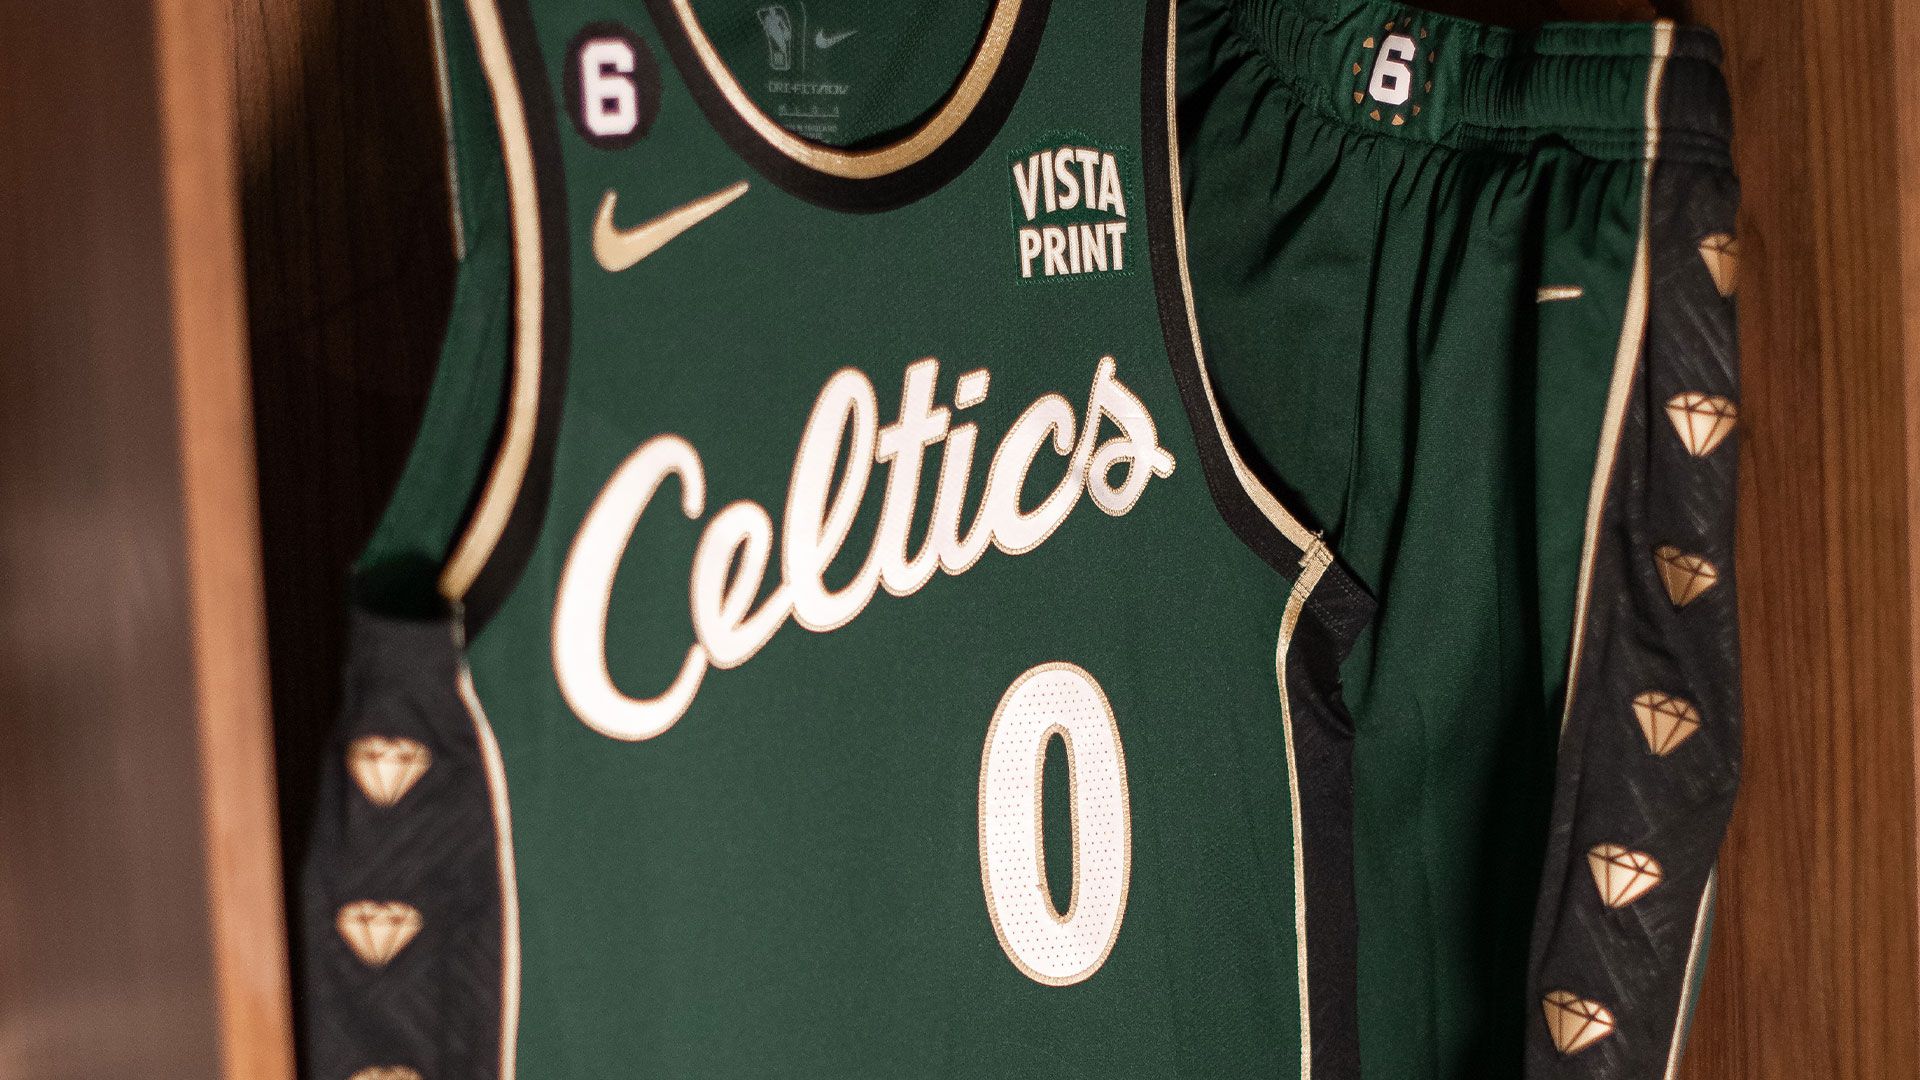 Celtics unveil 2022-23 City Edition jerseys to pay tribute to the